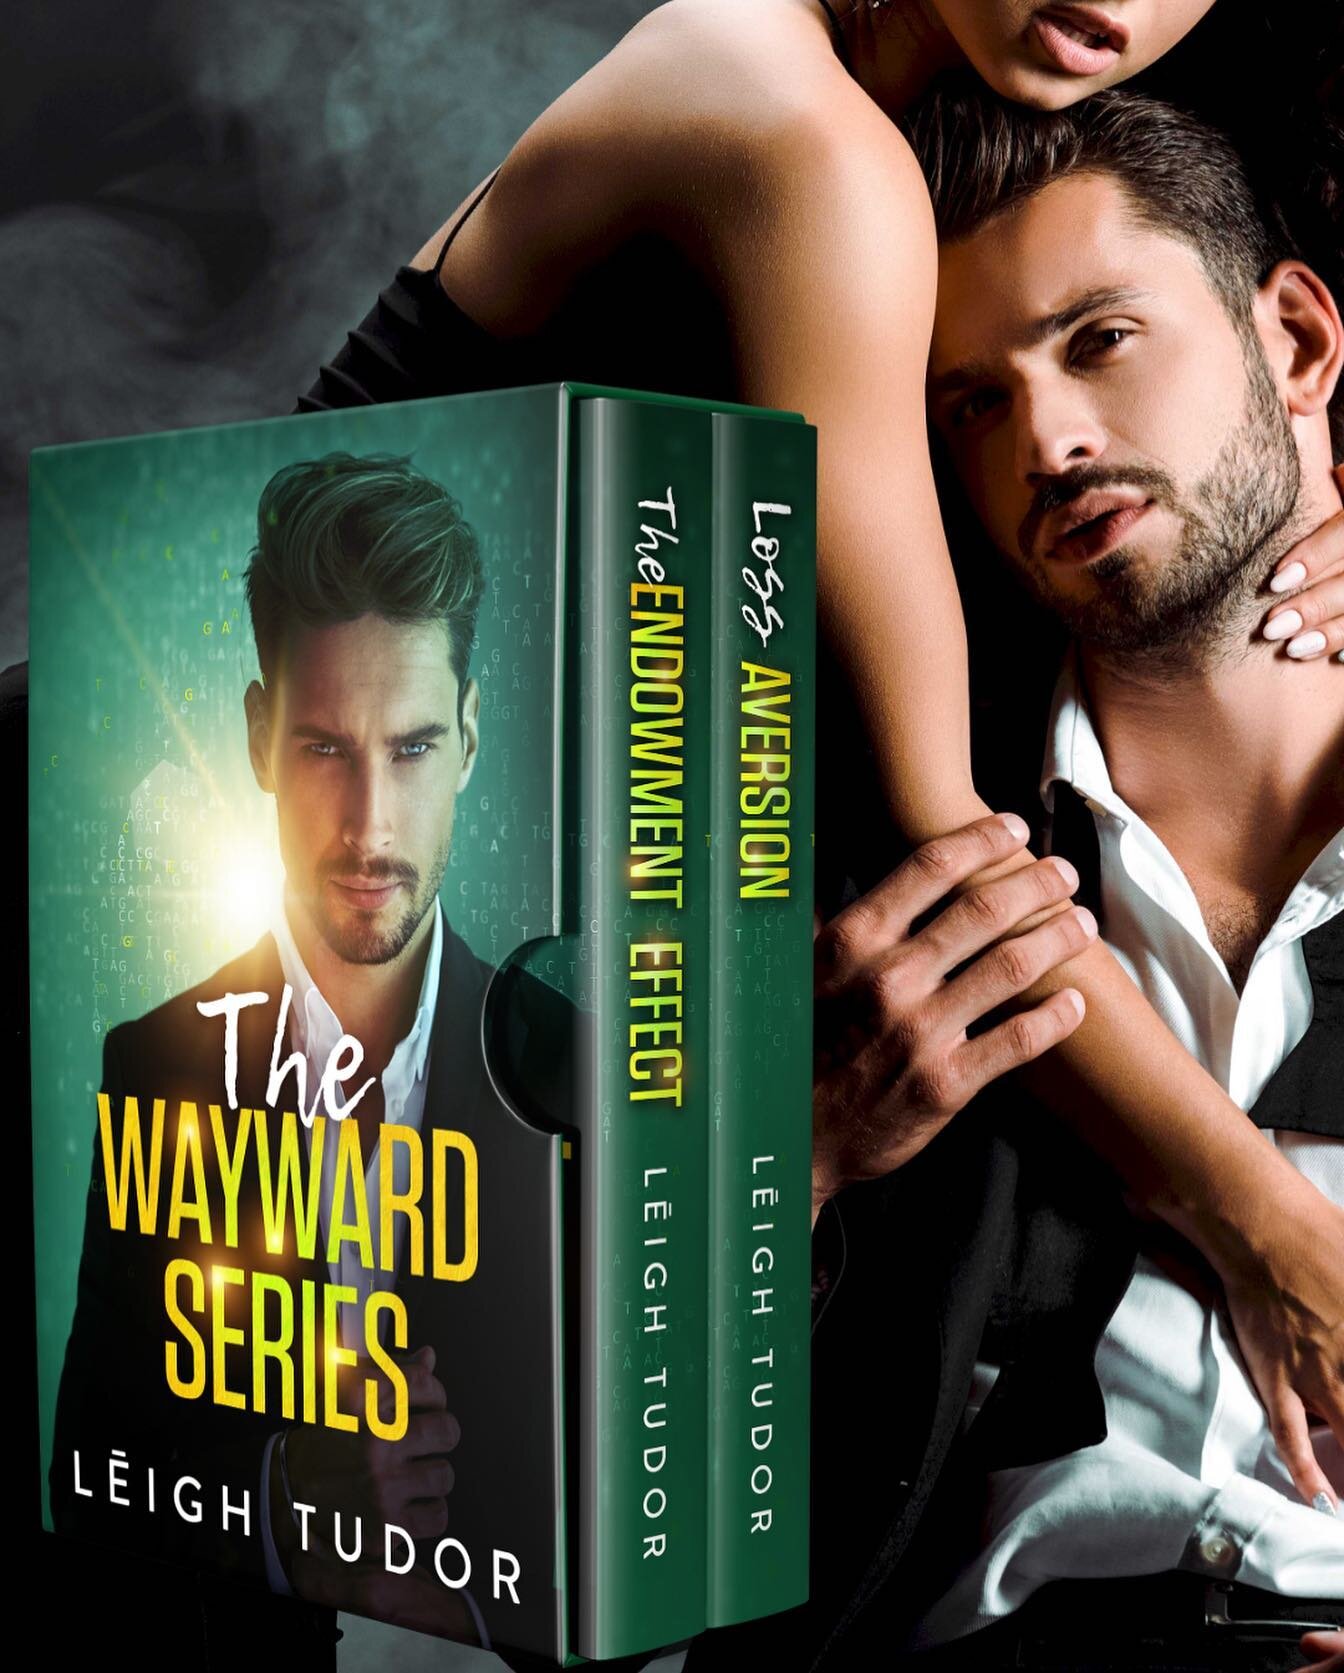 There&rsquo;s a risk to keeping secrets and a cost to going home. 

The Wayward Duet, Now available on Amazon as a Box Set!

https://amzn.to/3V45J8I